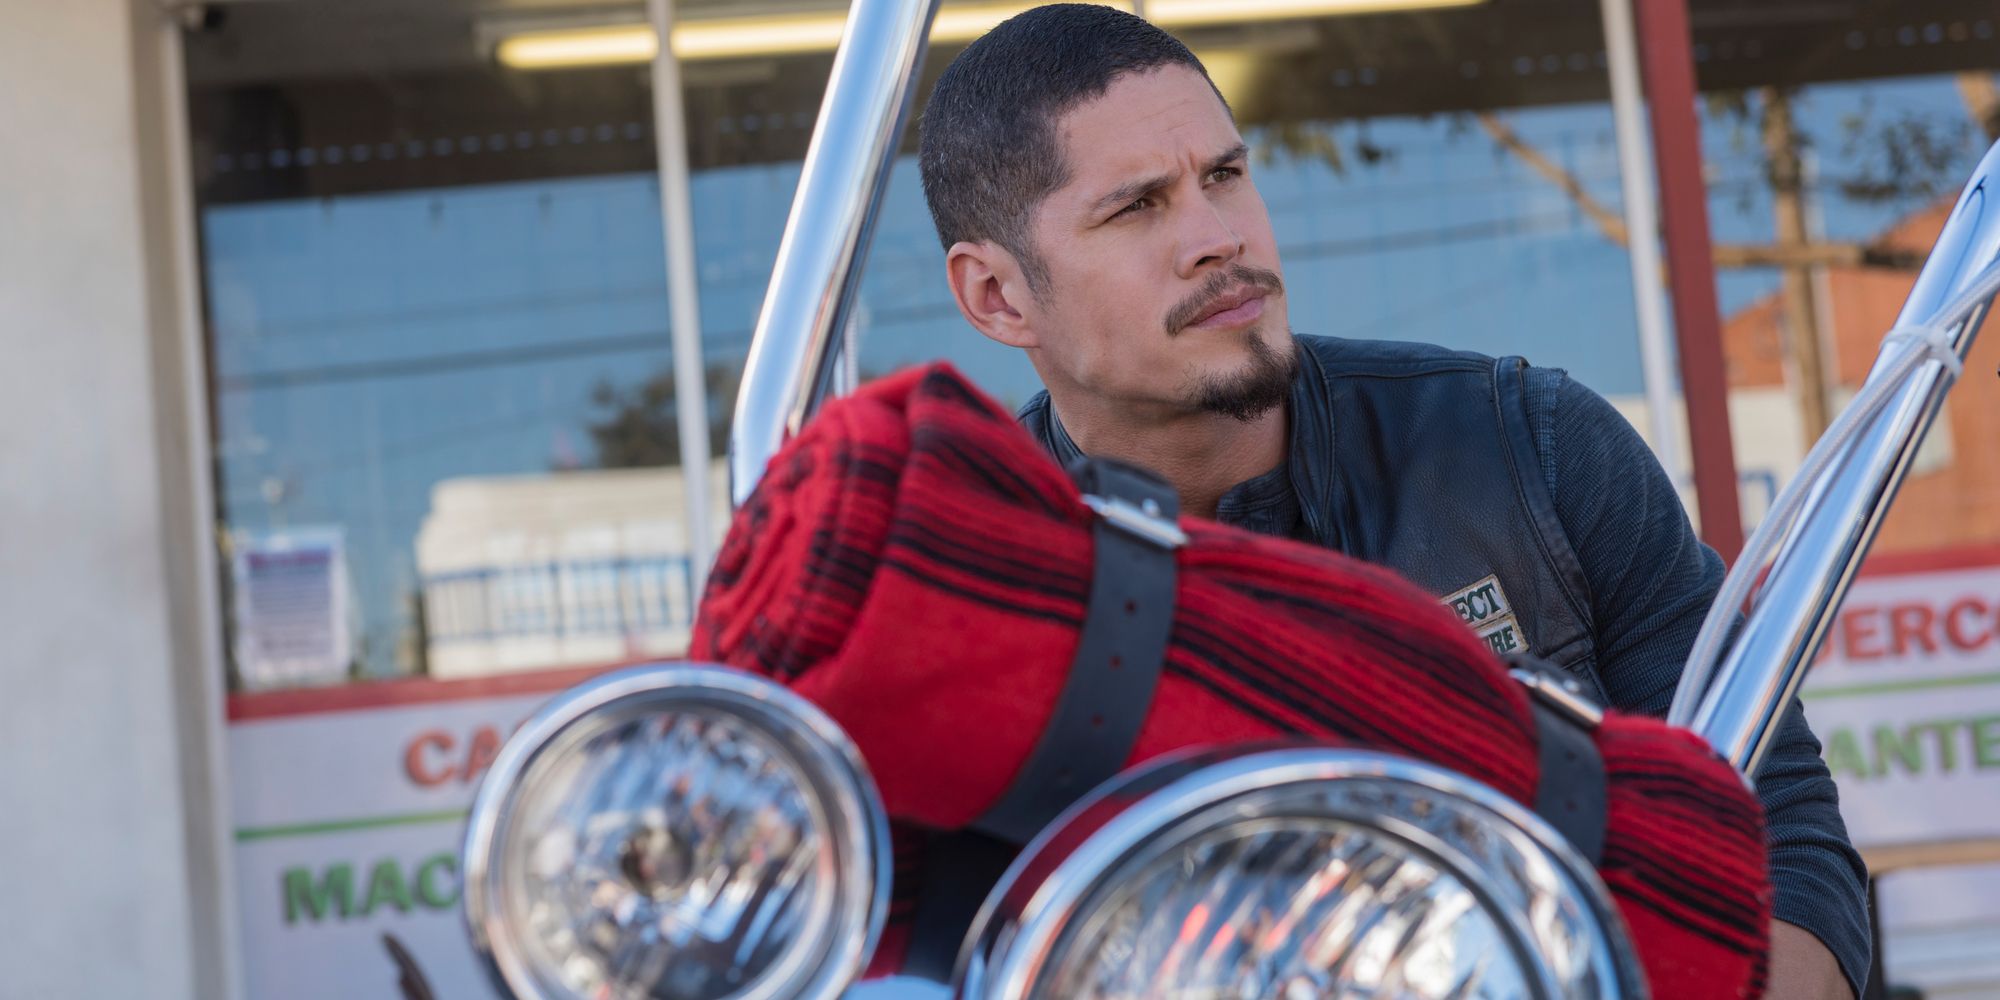 Mayans M.C. Review: An Imperfect But Promising Spinoff Of Sons of Anarchy